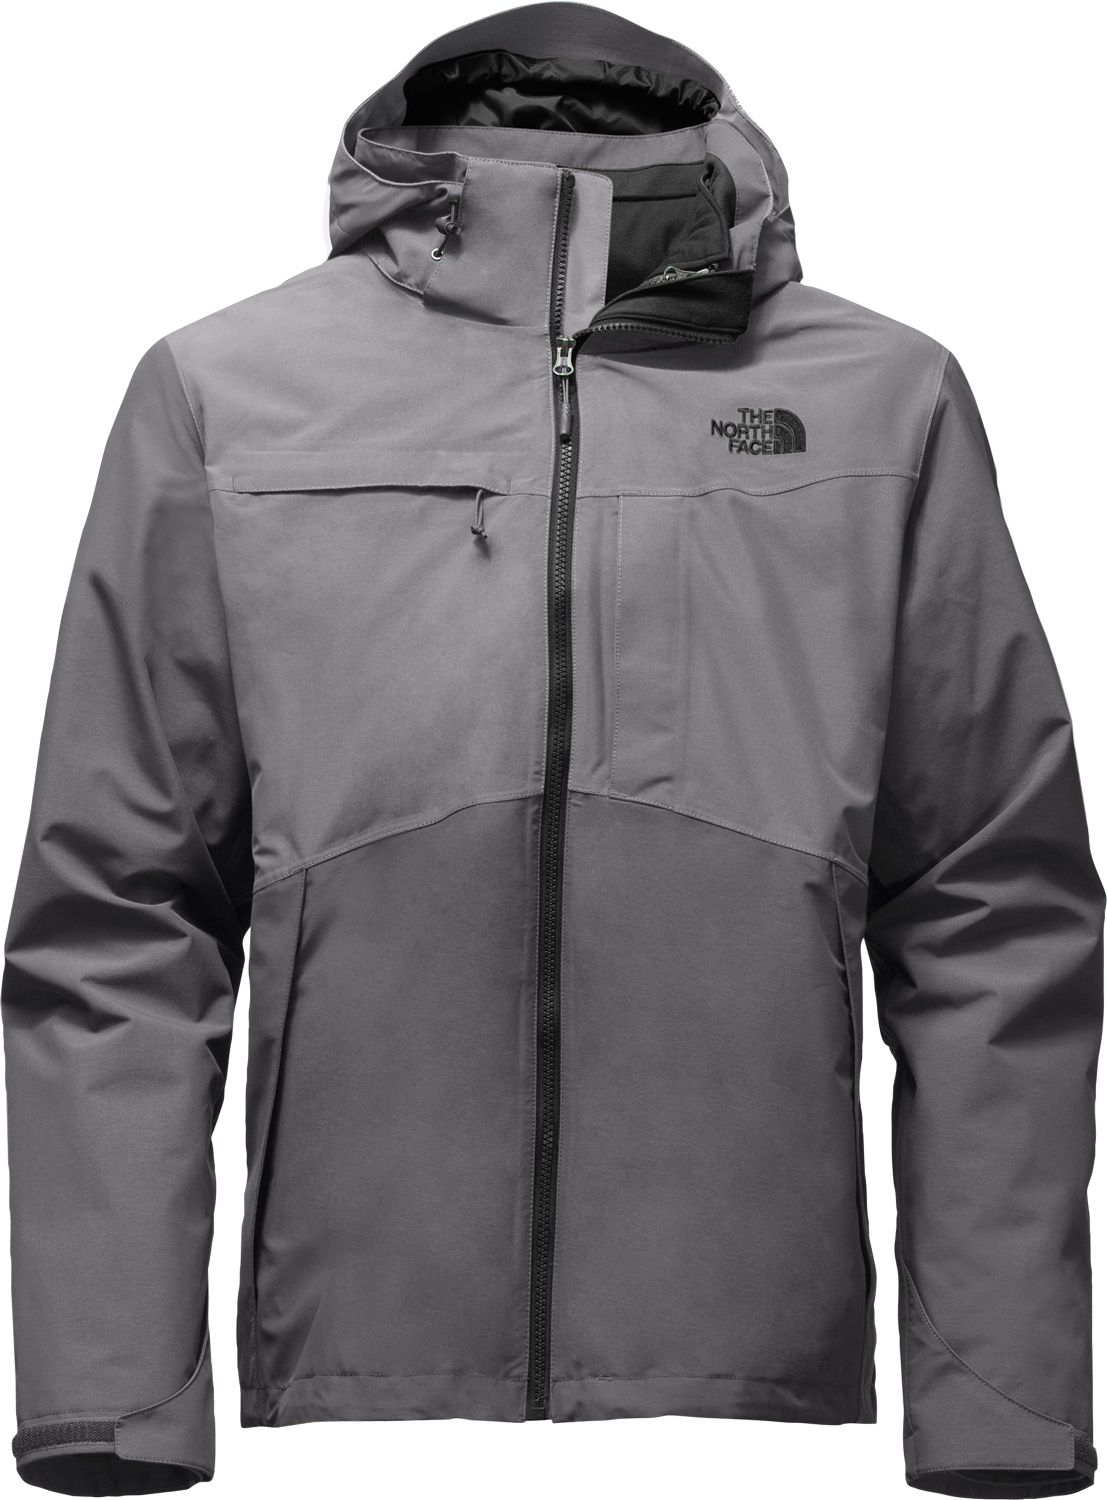 The North Face Men's Condor Triclimate Jacket - 9.97